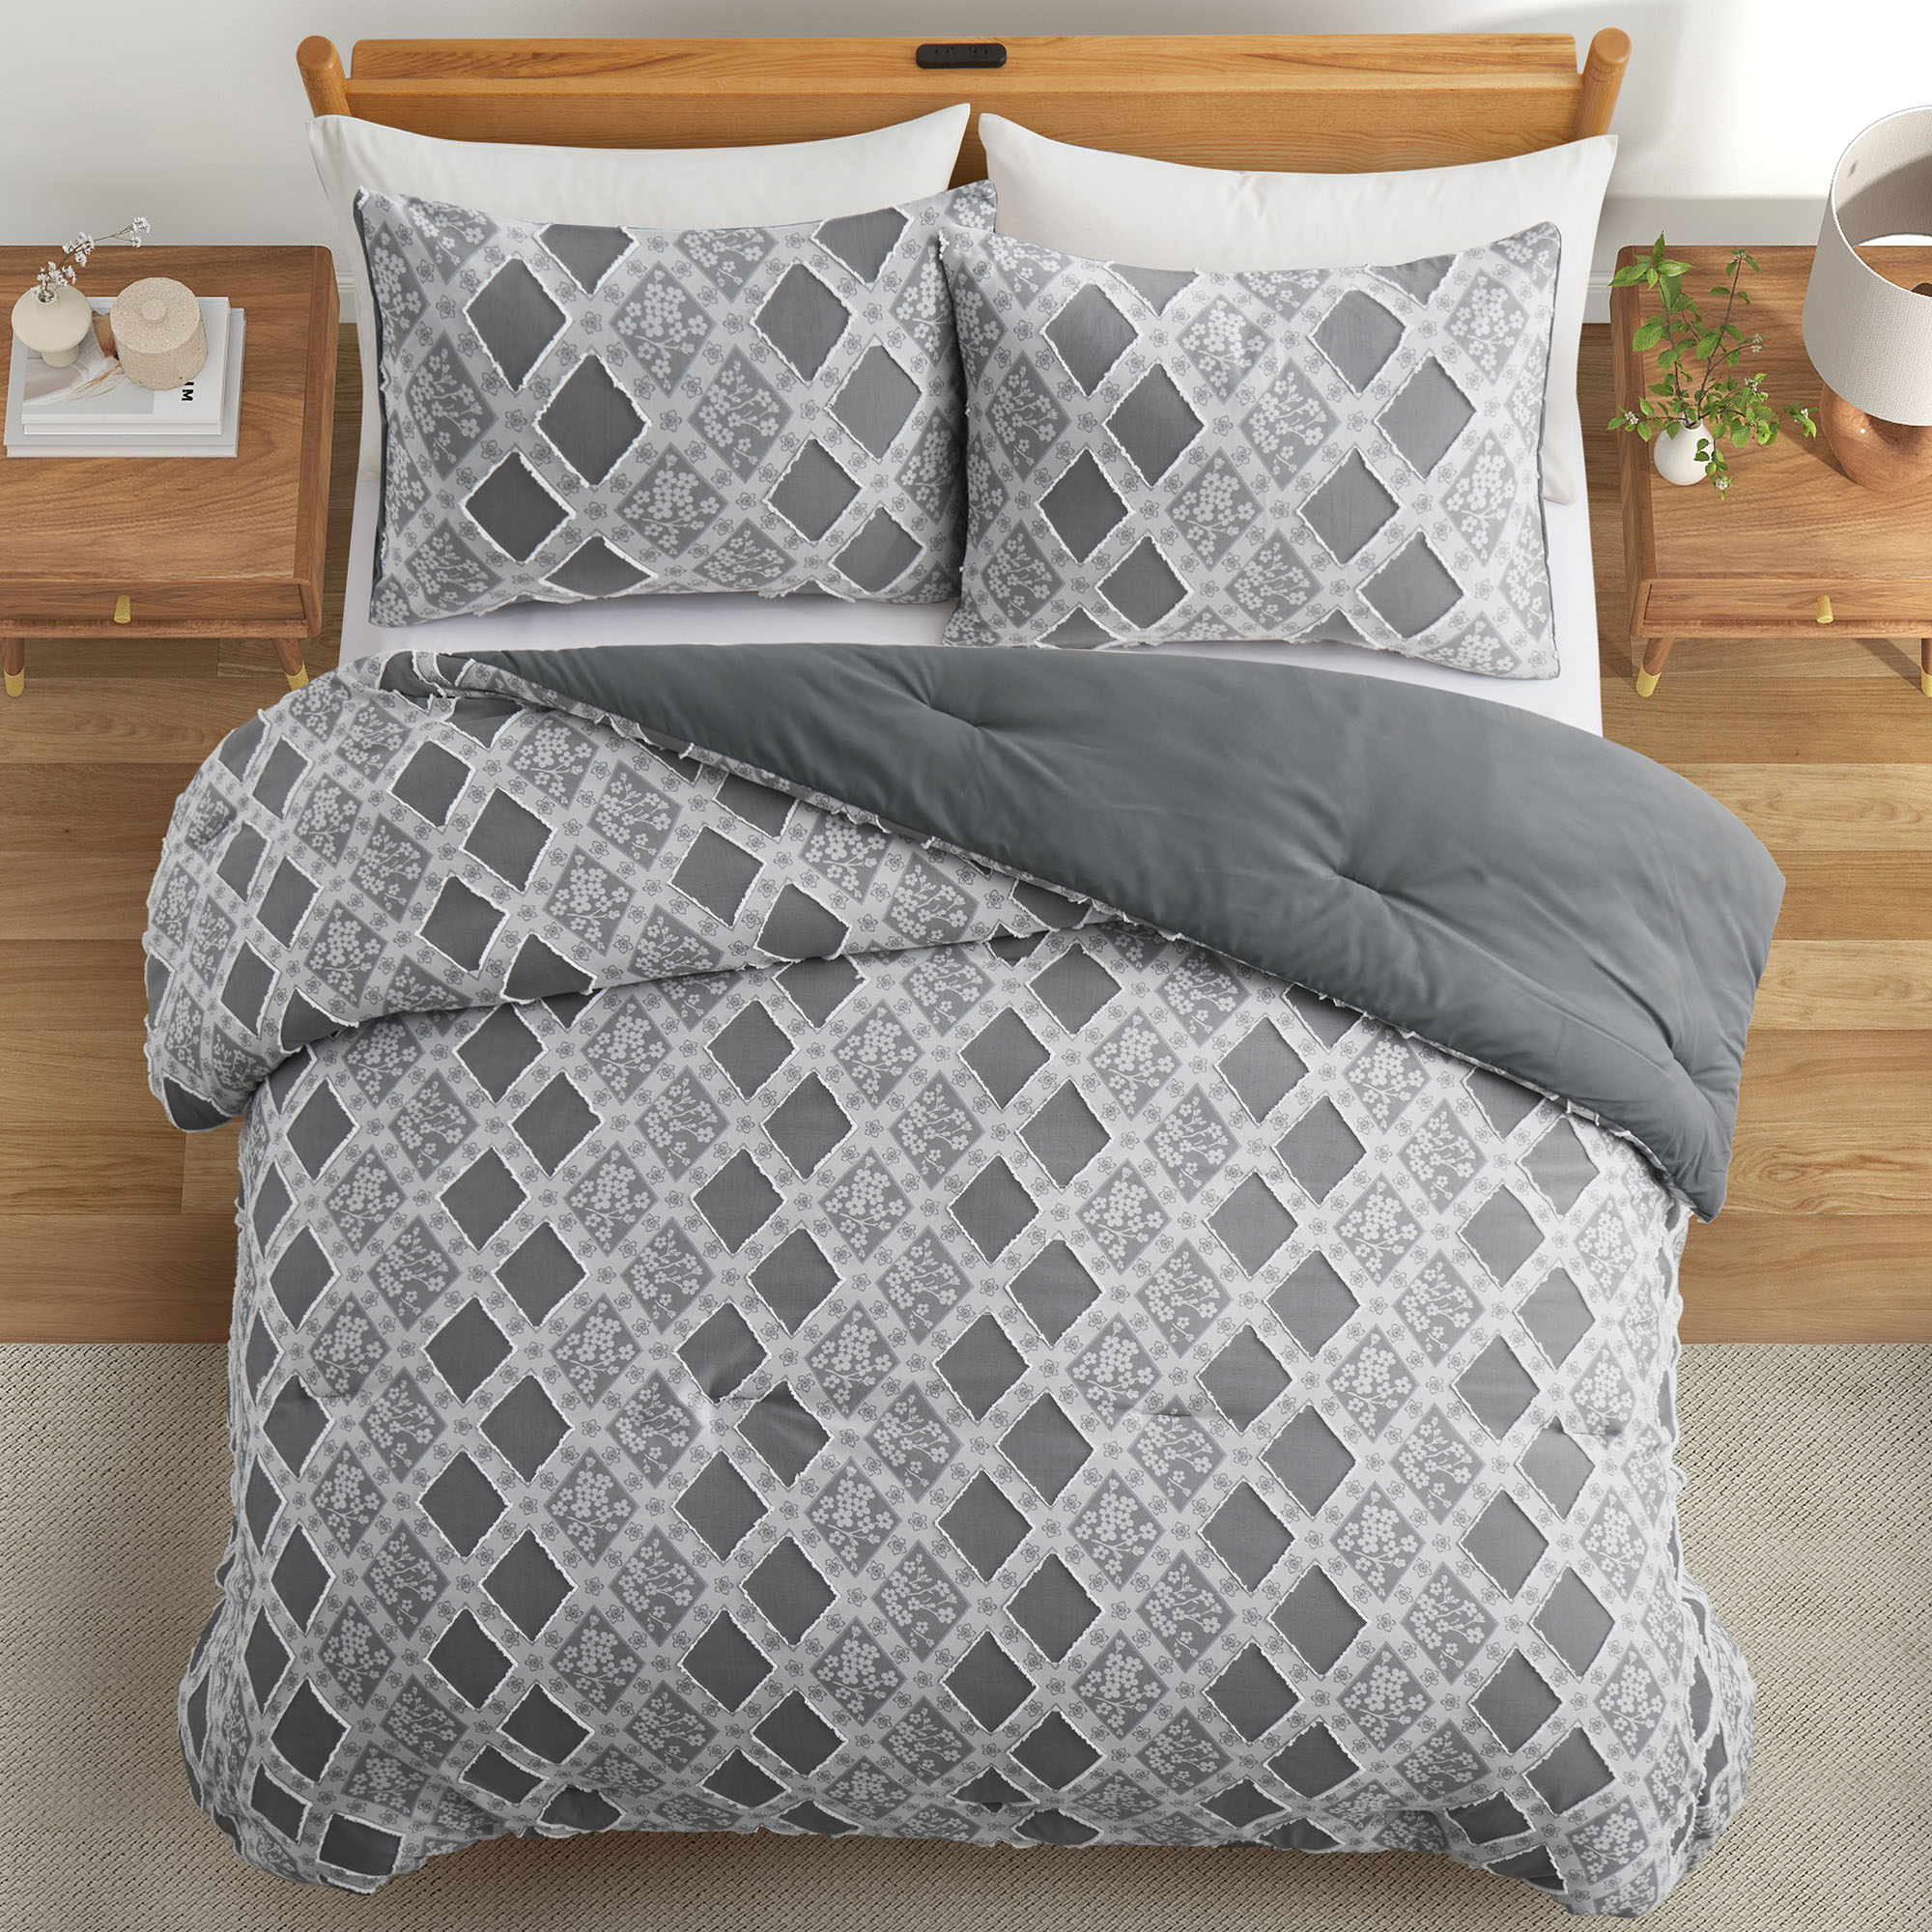 Ultra Soft Down Alternative Comforter Set With Matching Pillowcase- All-Season Warmth - King